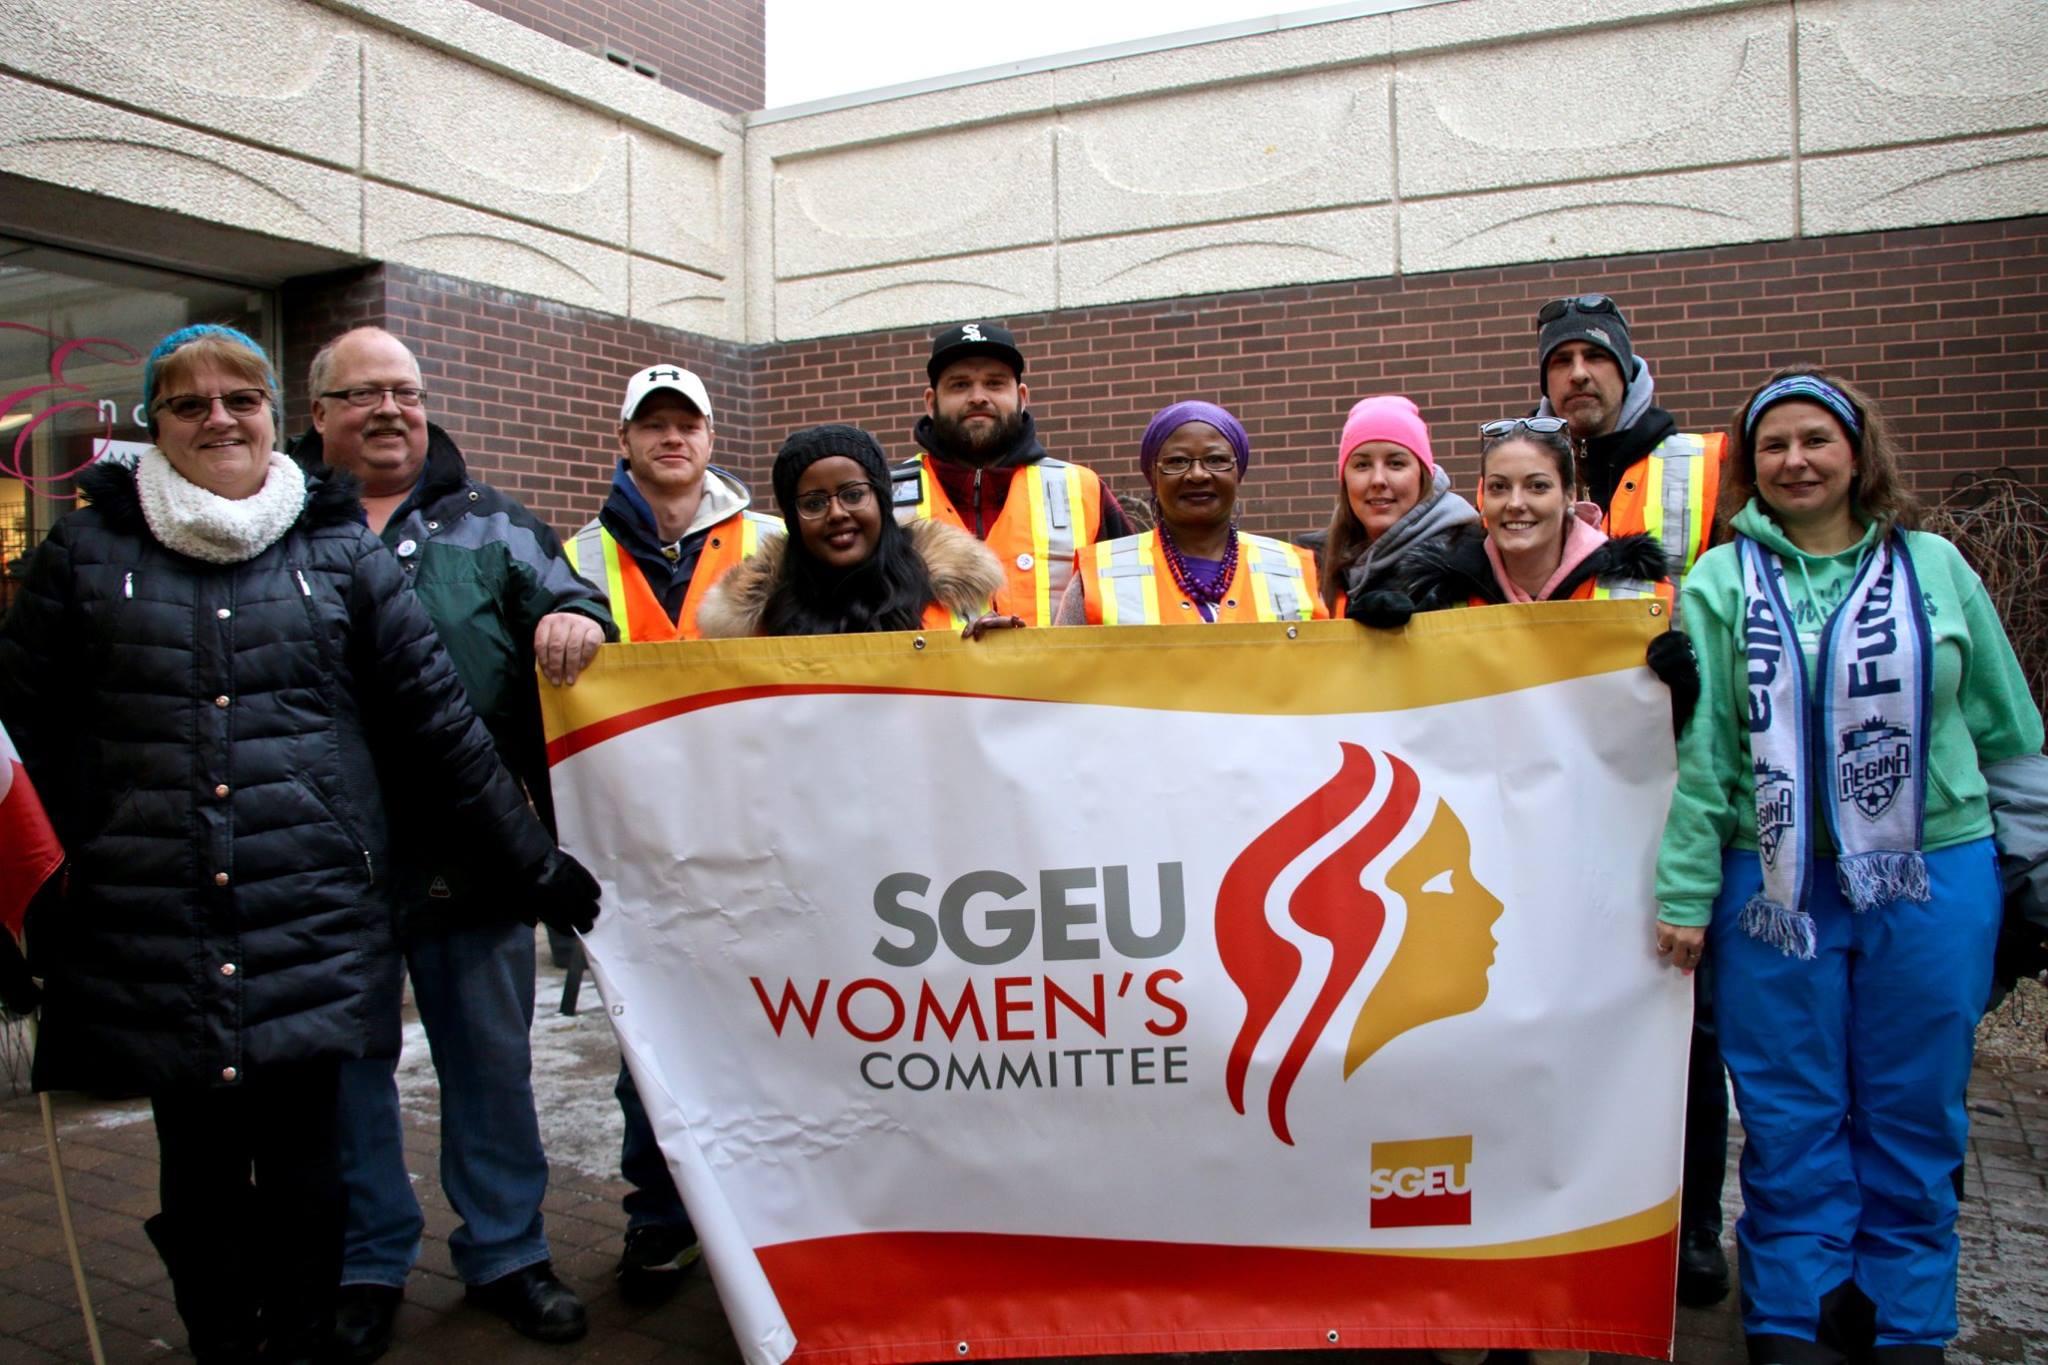 YWCA grateful for SGEU's support